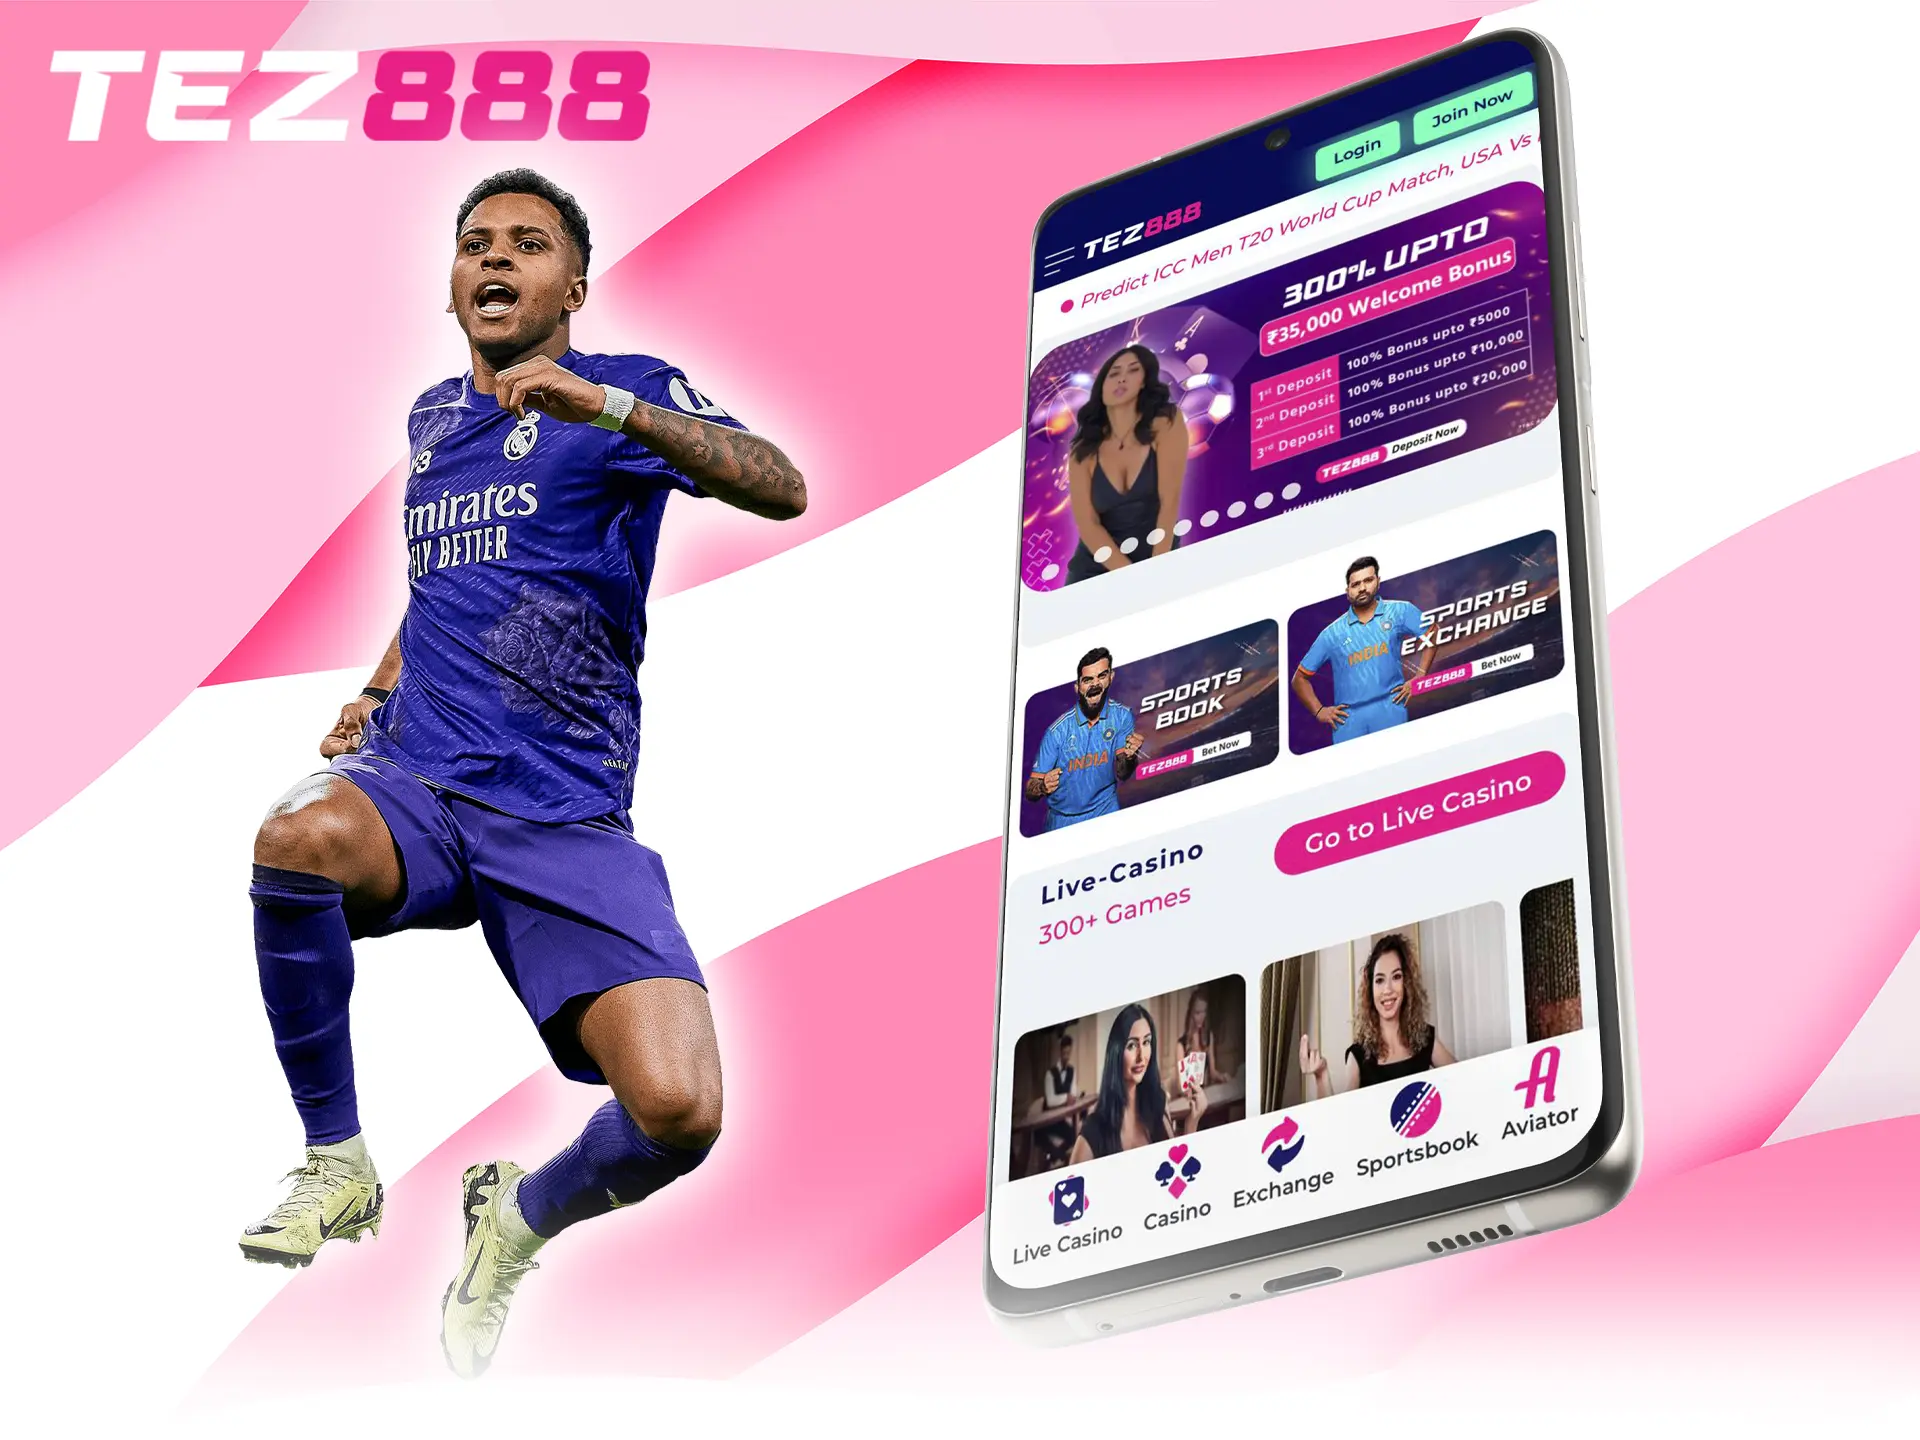 Tez888 is a performance app with the ability to bet on football live.